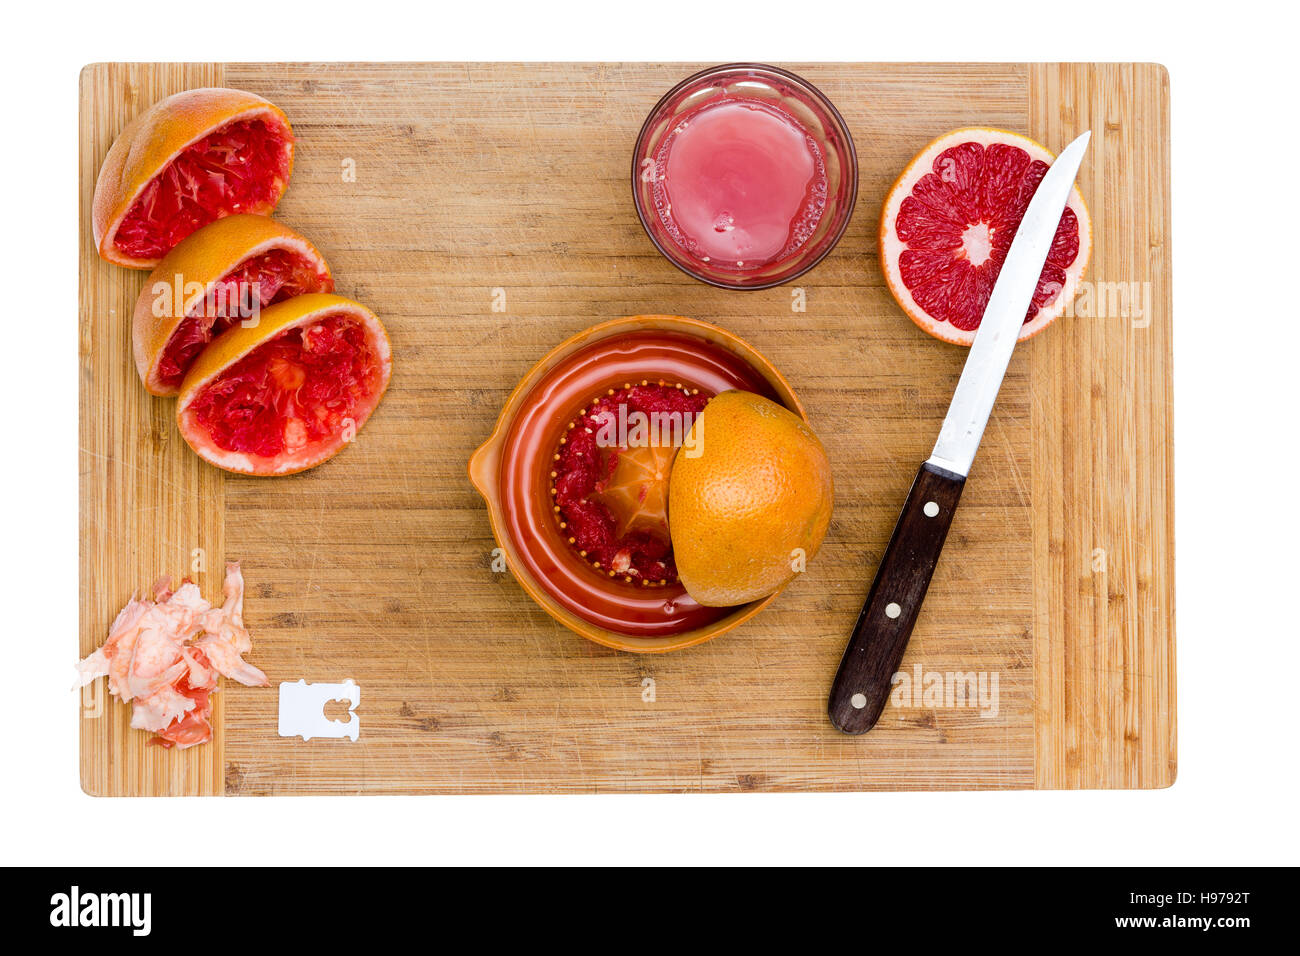 Fresh Grapefruits being Juiced, Ruby Red Grapefruit on Wooden Kitchen Board isolated on white Stock Photo